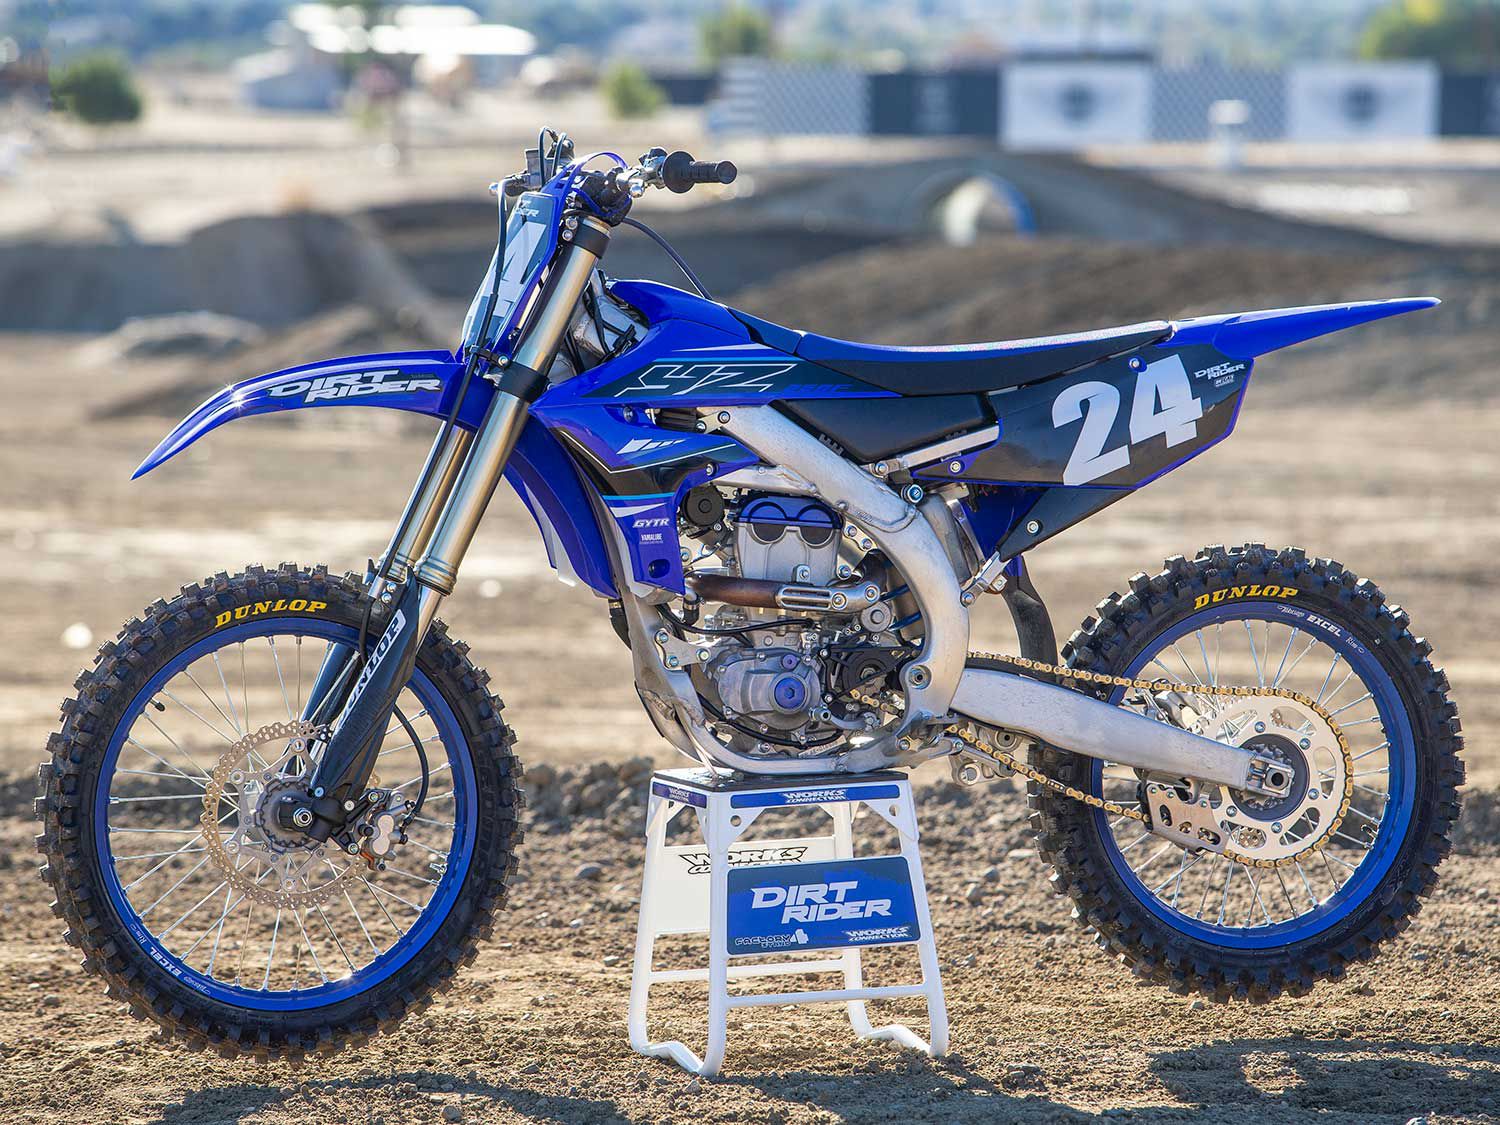 Top 10 Best Motocross Bikes of all time